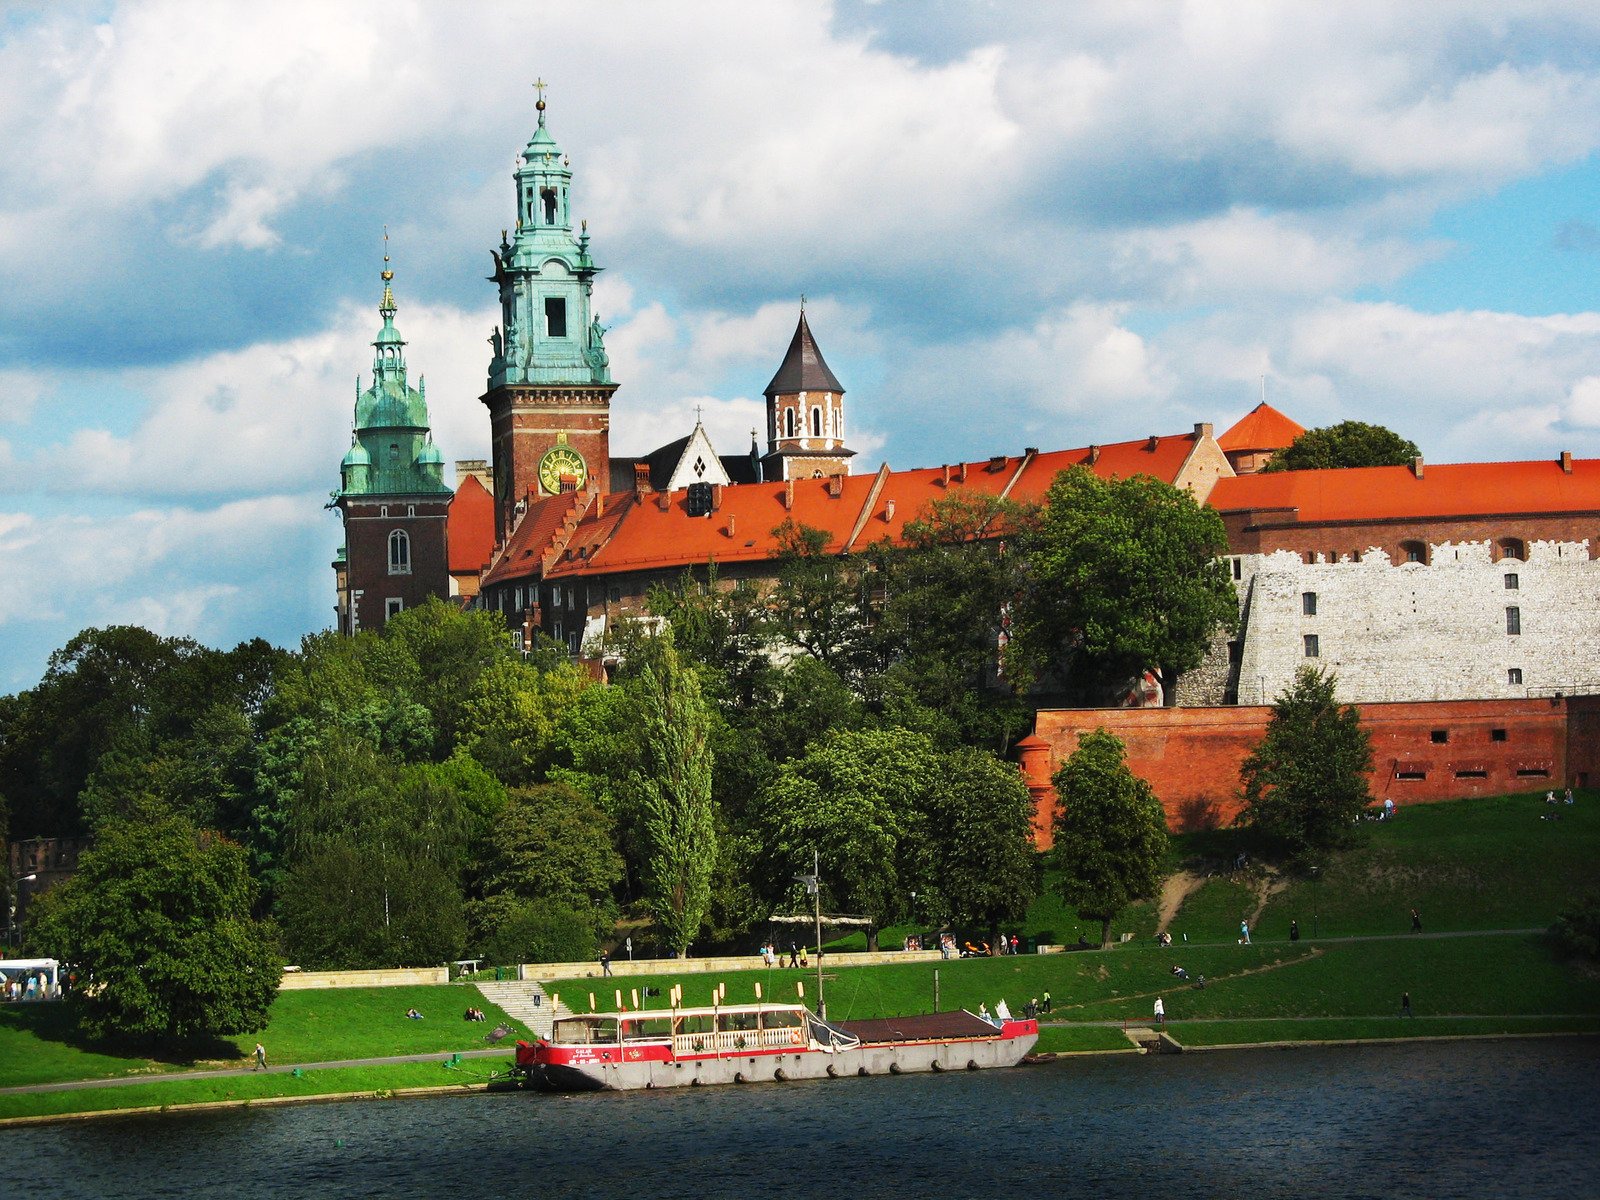 a river cruise boat on a scenic lake and old buildings